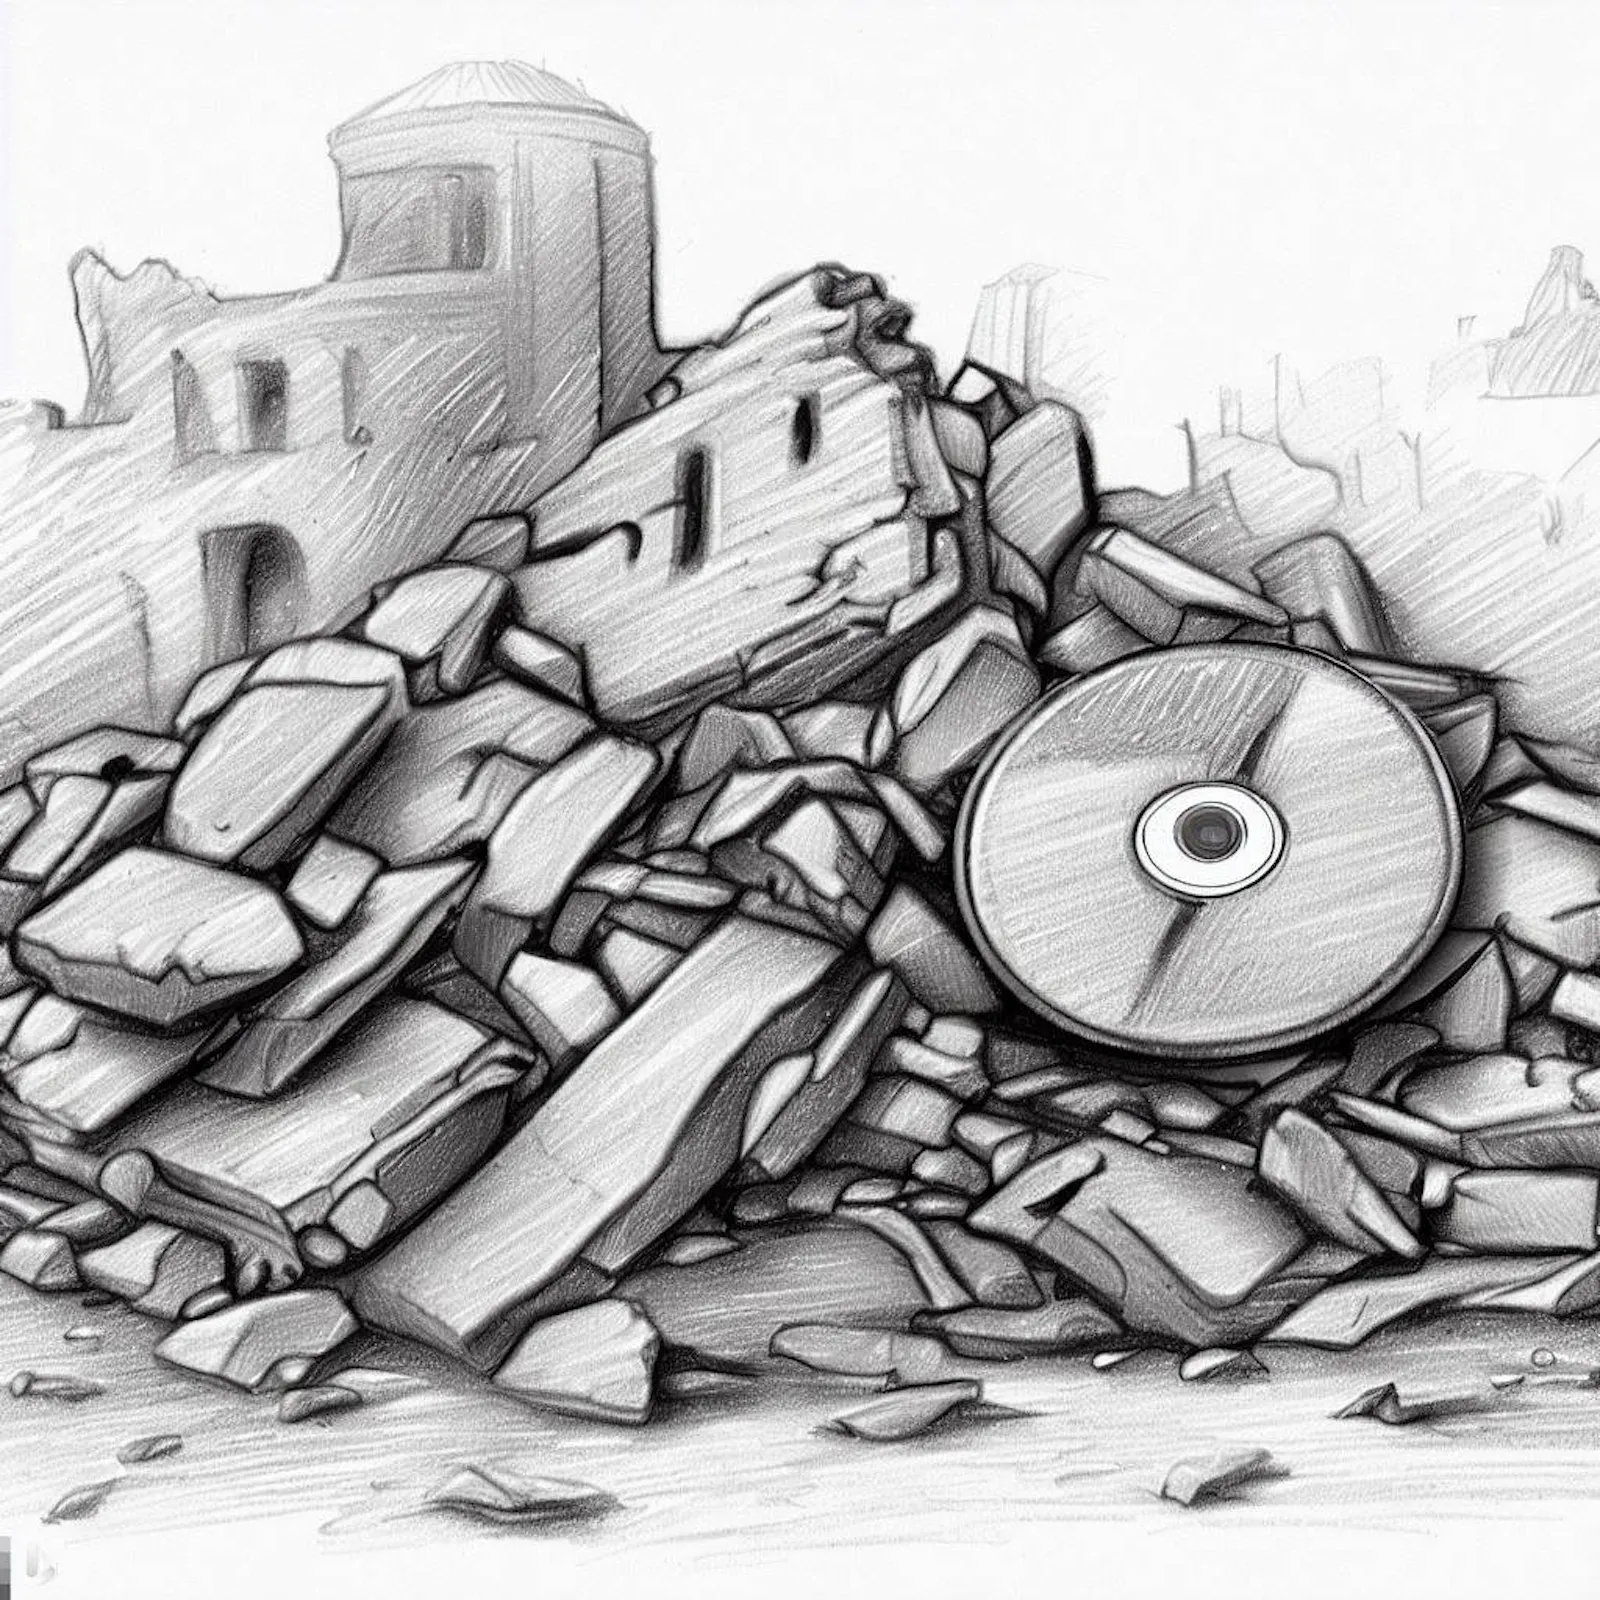 "a dvd among rubble and ruins, archeological pencil sketch"